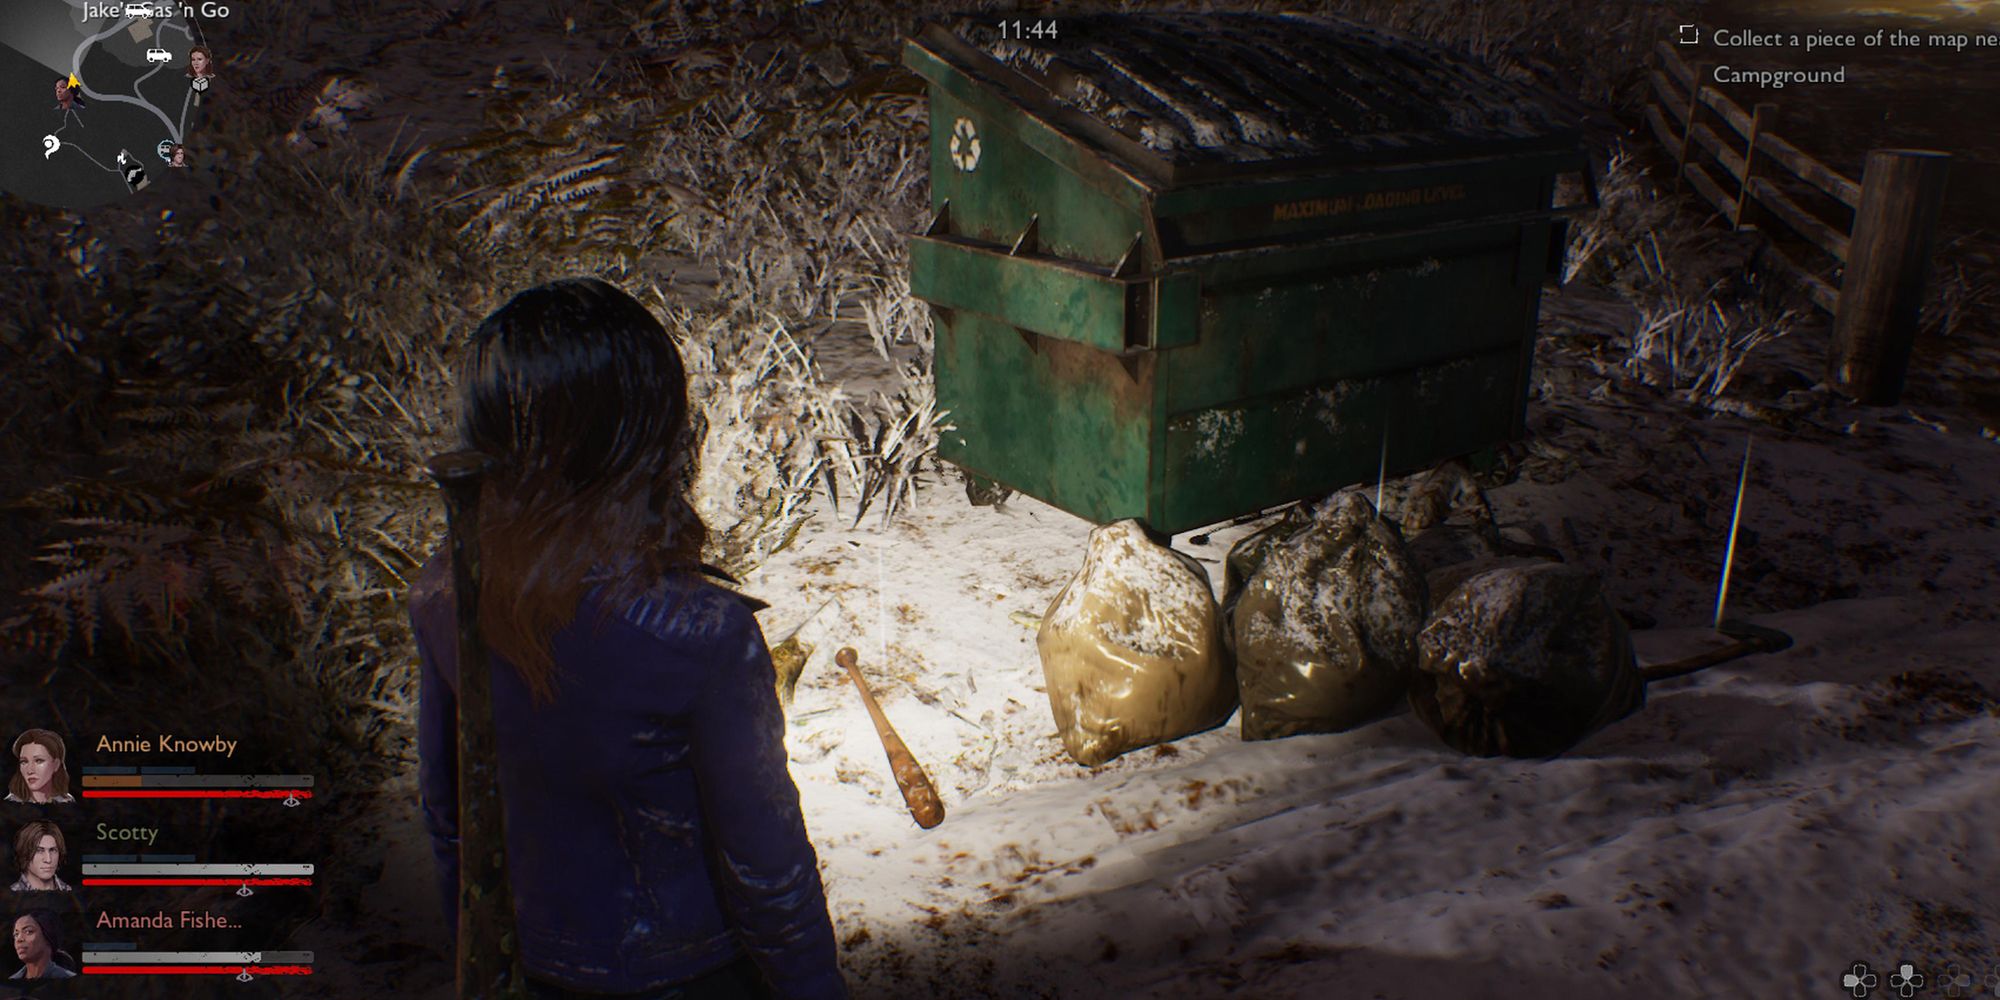 Evil Dead The Game. Weapons laying near garbage bin.